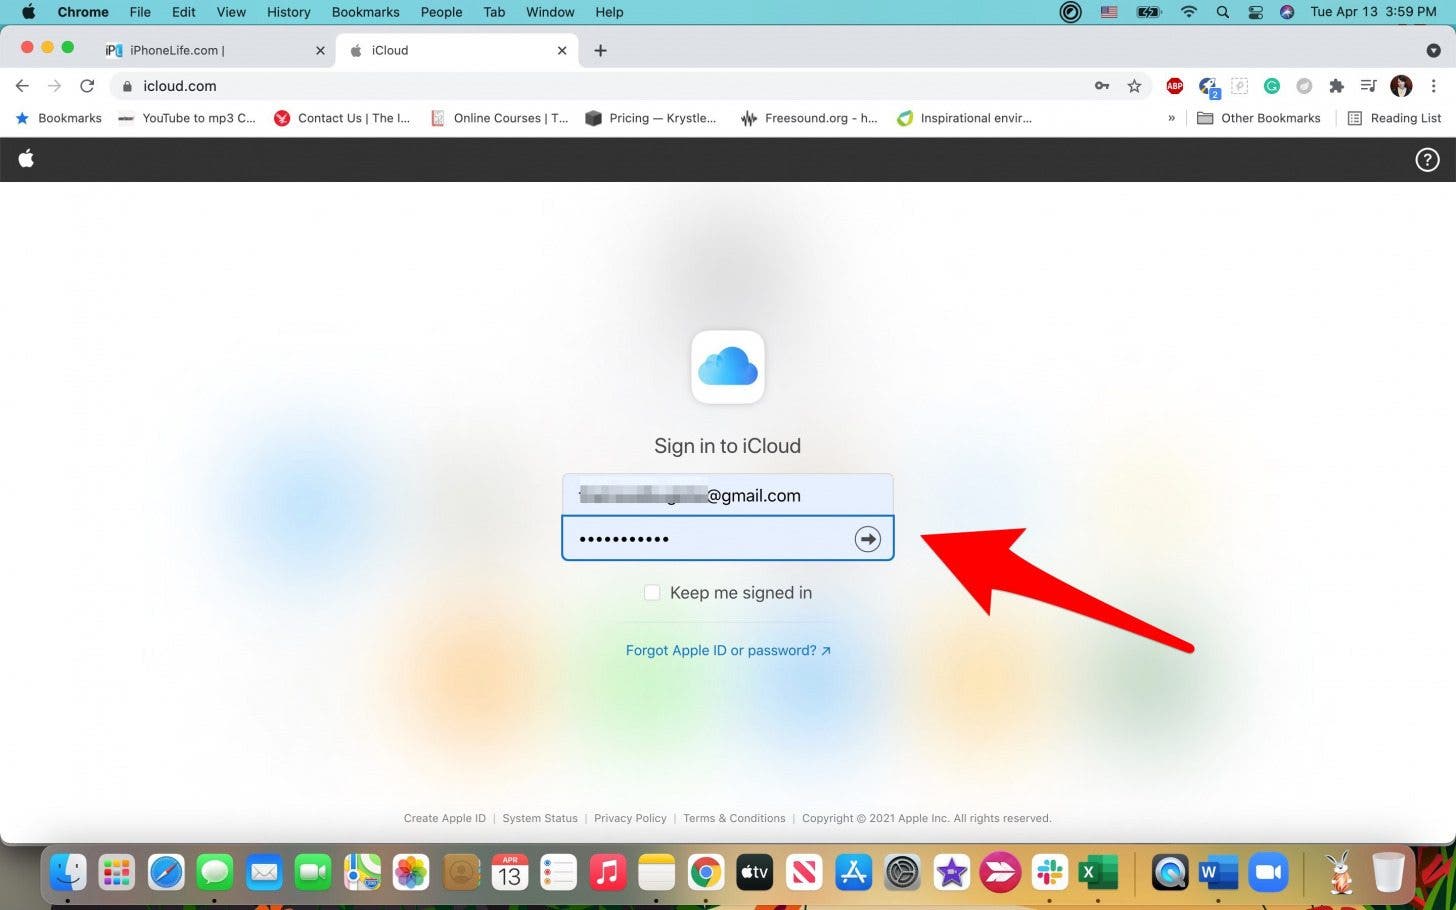 Sign in to iCloud using your Apple ID.